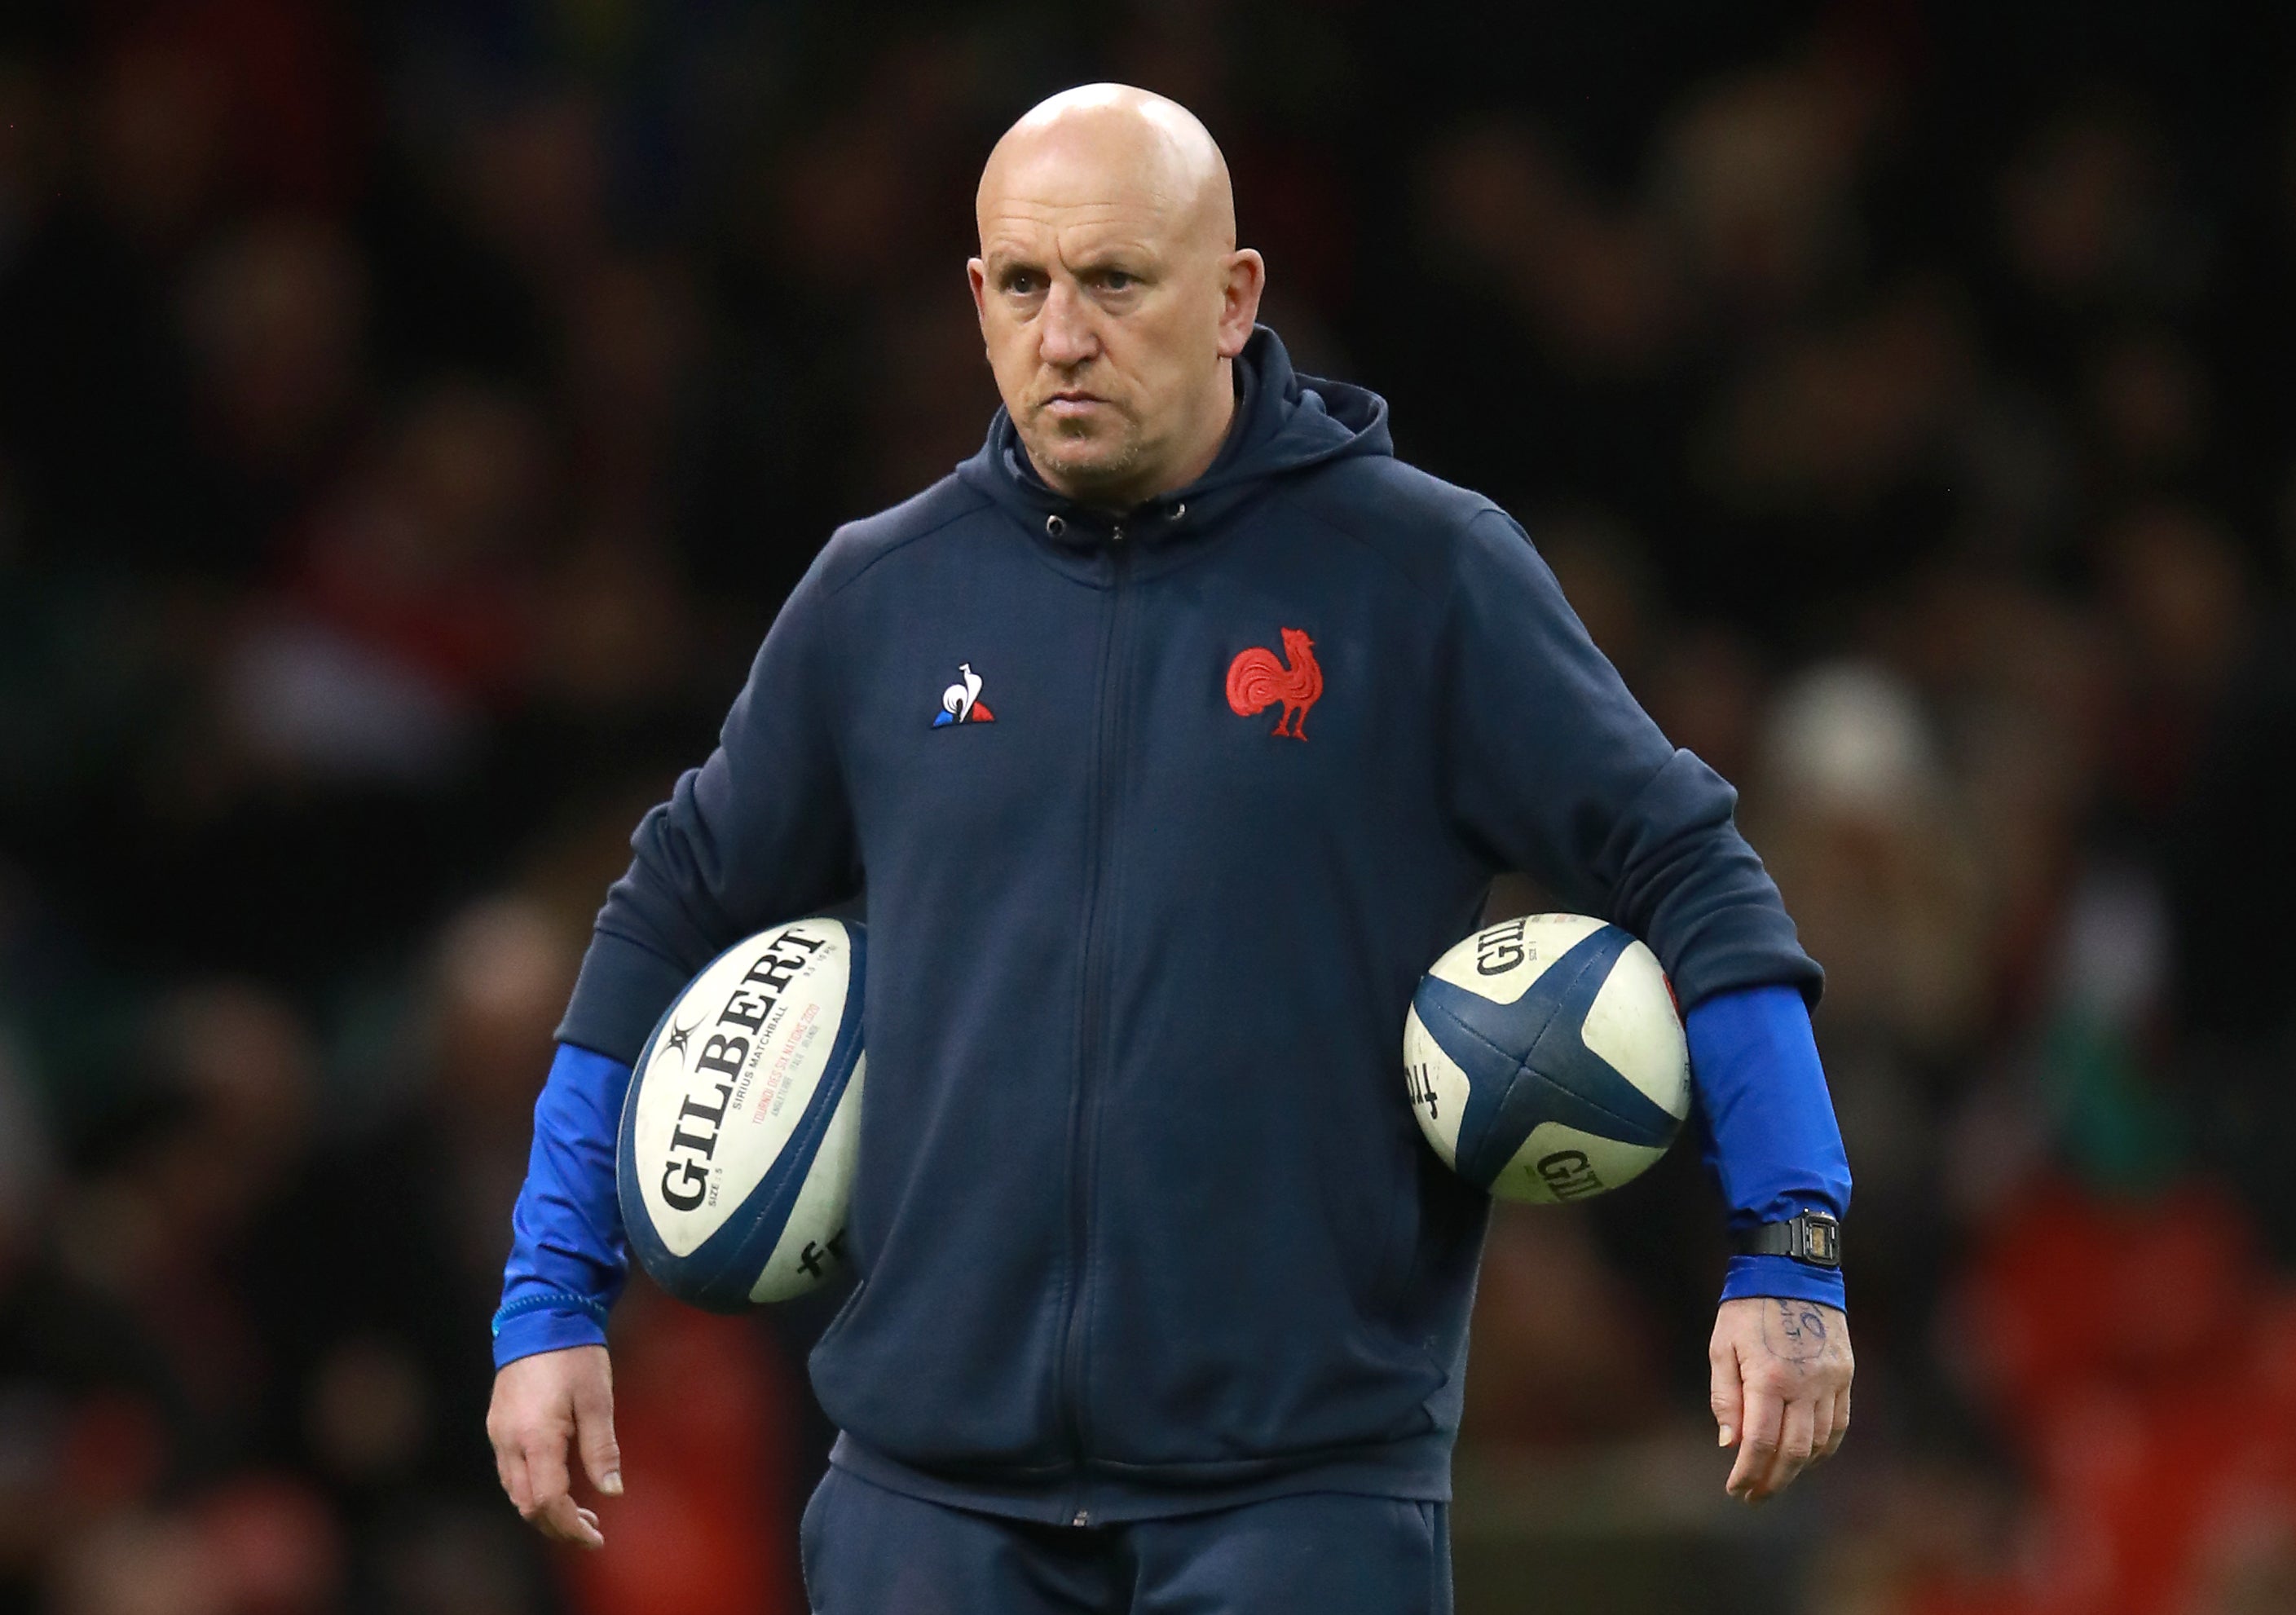 Shaun Edwards spent 11 years as defence coach with Wales before he joined France’s coaching staff in 2020 (Adam Davy/PA)